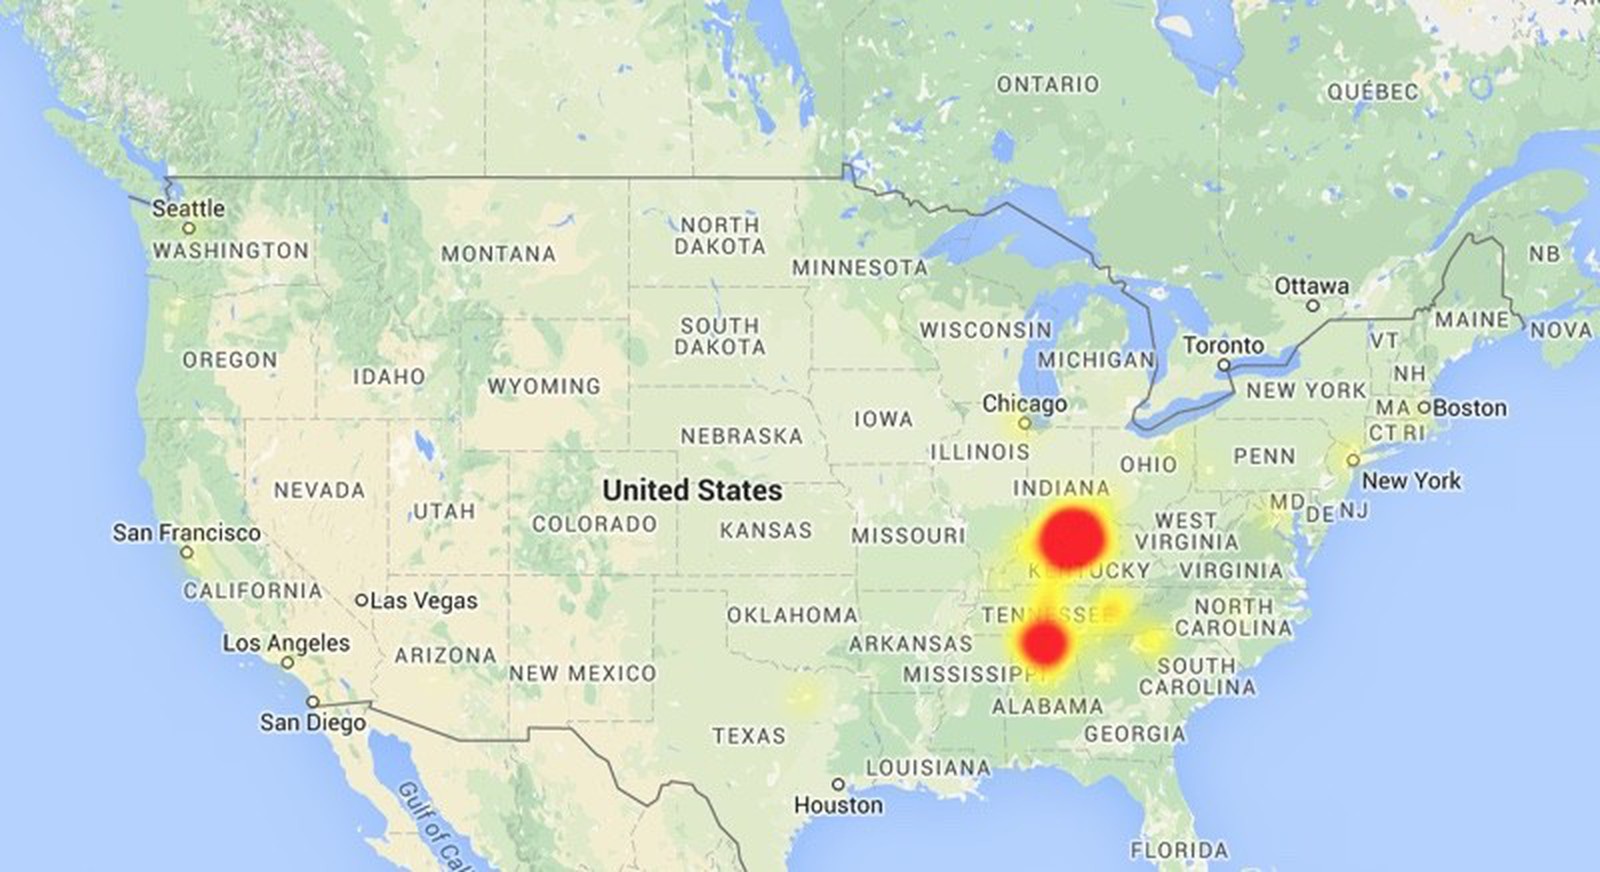 Cellular Service Outage Affecting Users in Southeastern United States